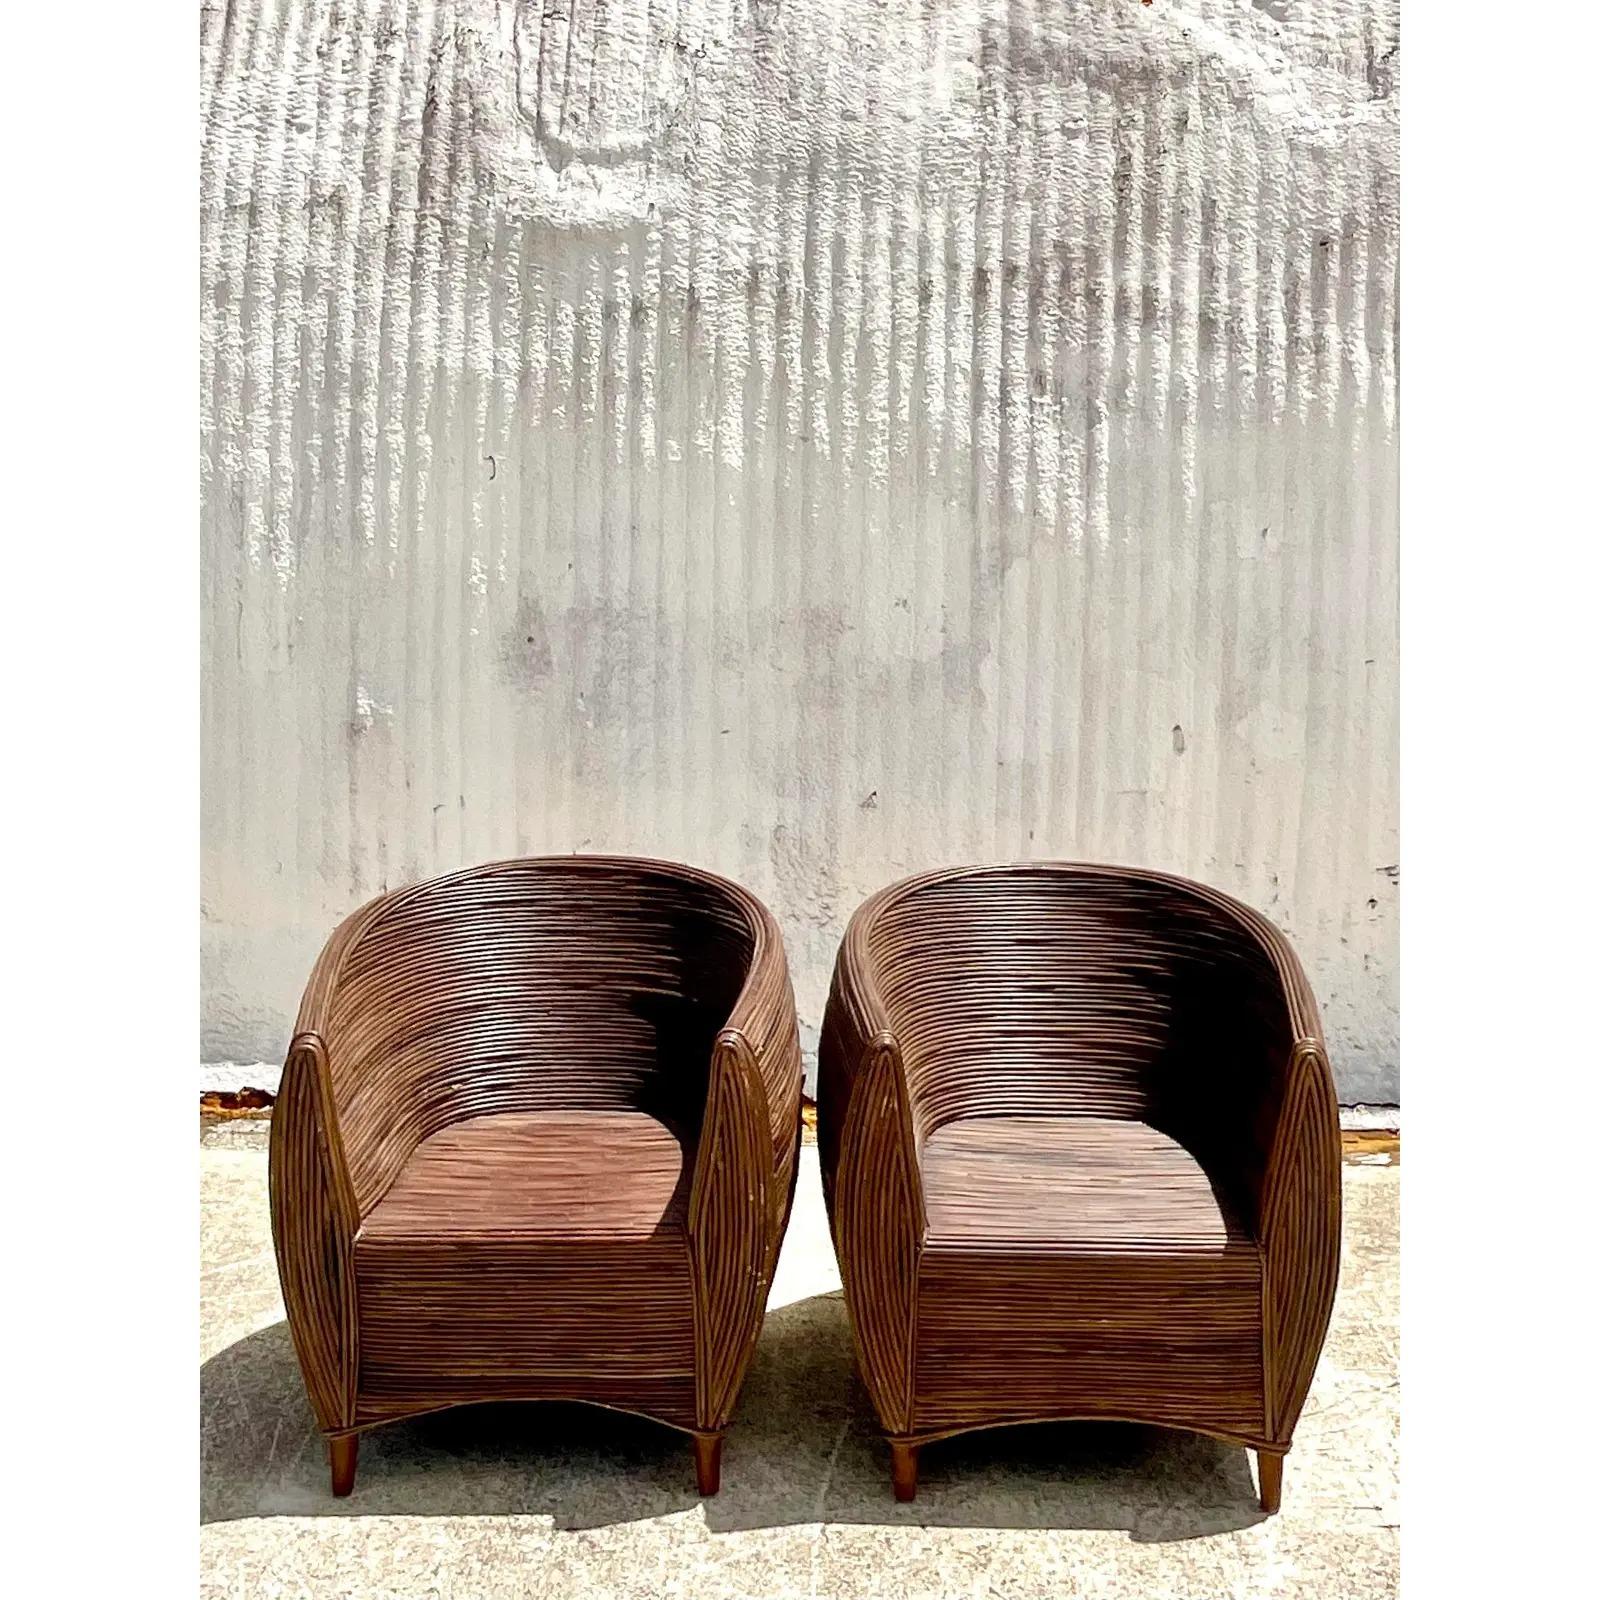 A fantastic pair of vintage Coastal pod chairs. Super chic pod shape constructed with coiled pencil reed in a deep brown color. Raised on four legs. Acquired from a Palm Beach estate.